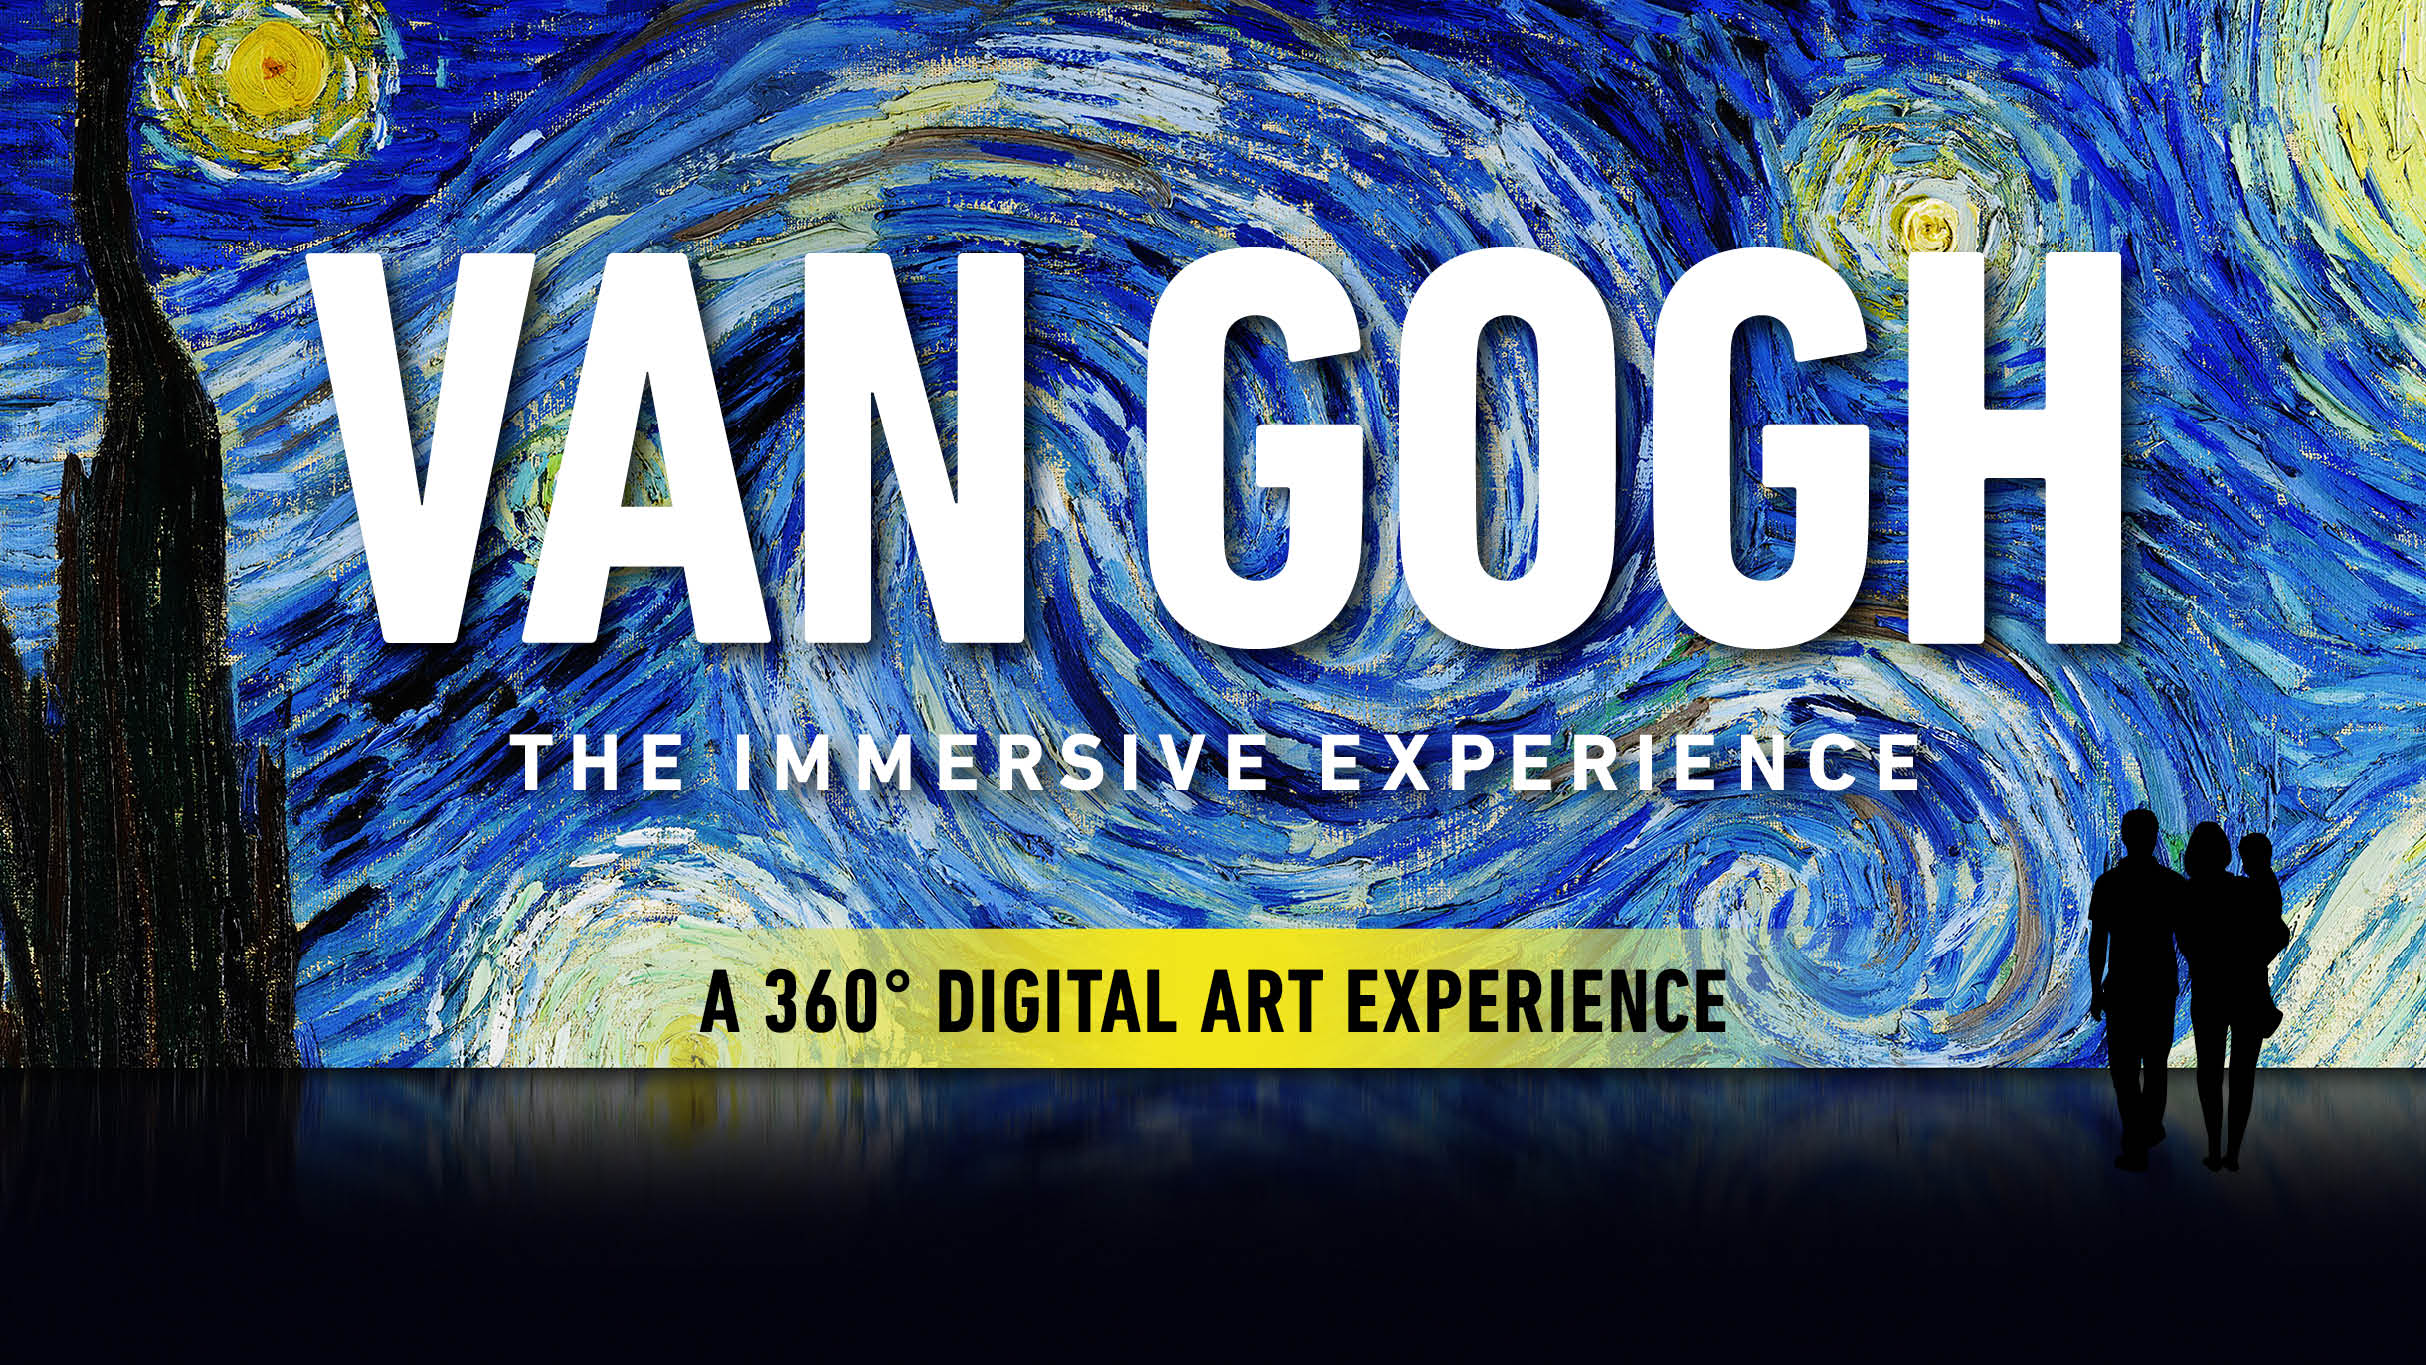 Image name Van Gogh The Immersive Experience at York St Marys York the 7 image from the post Van Gogh: The Immersive Experience at York St. Mary's, York in Yorkshire.com.